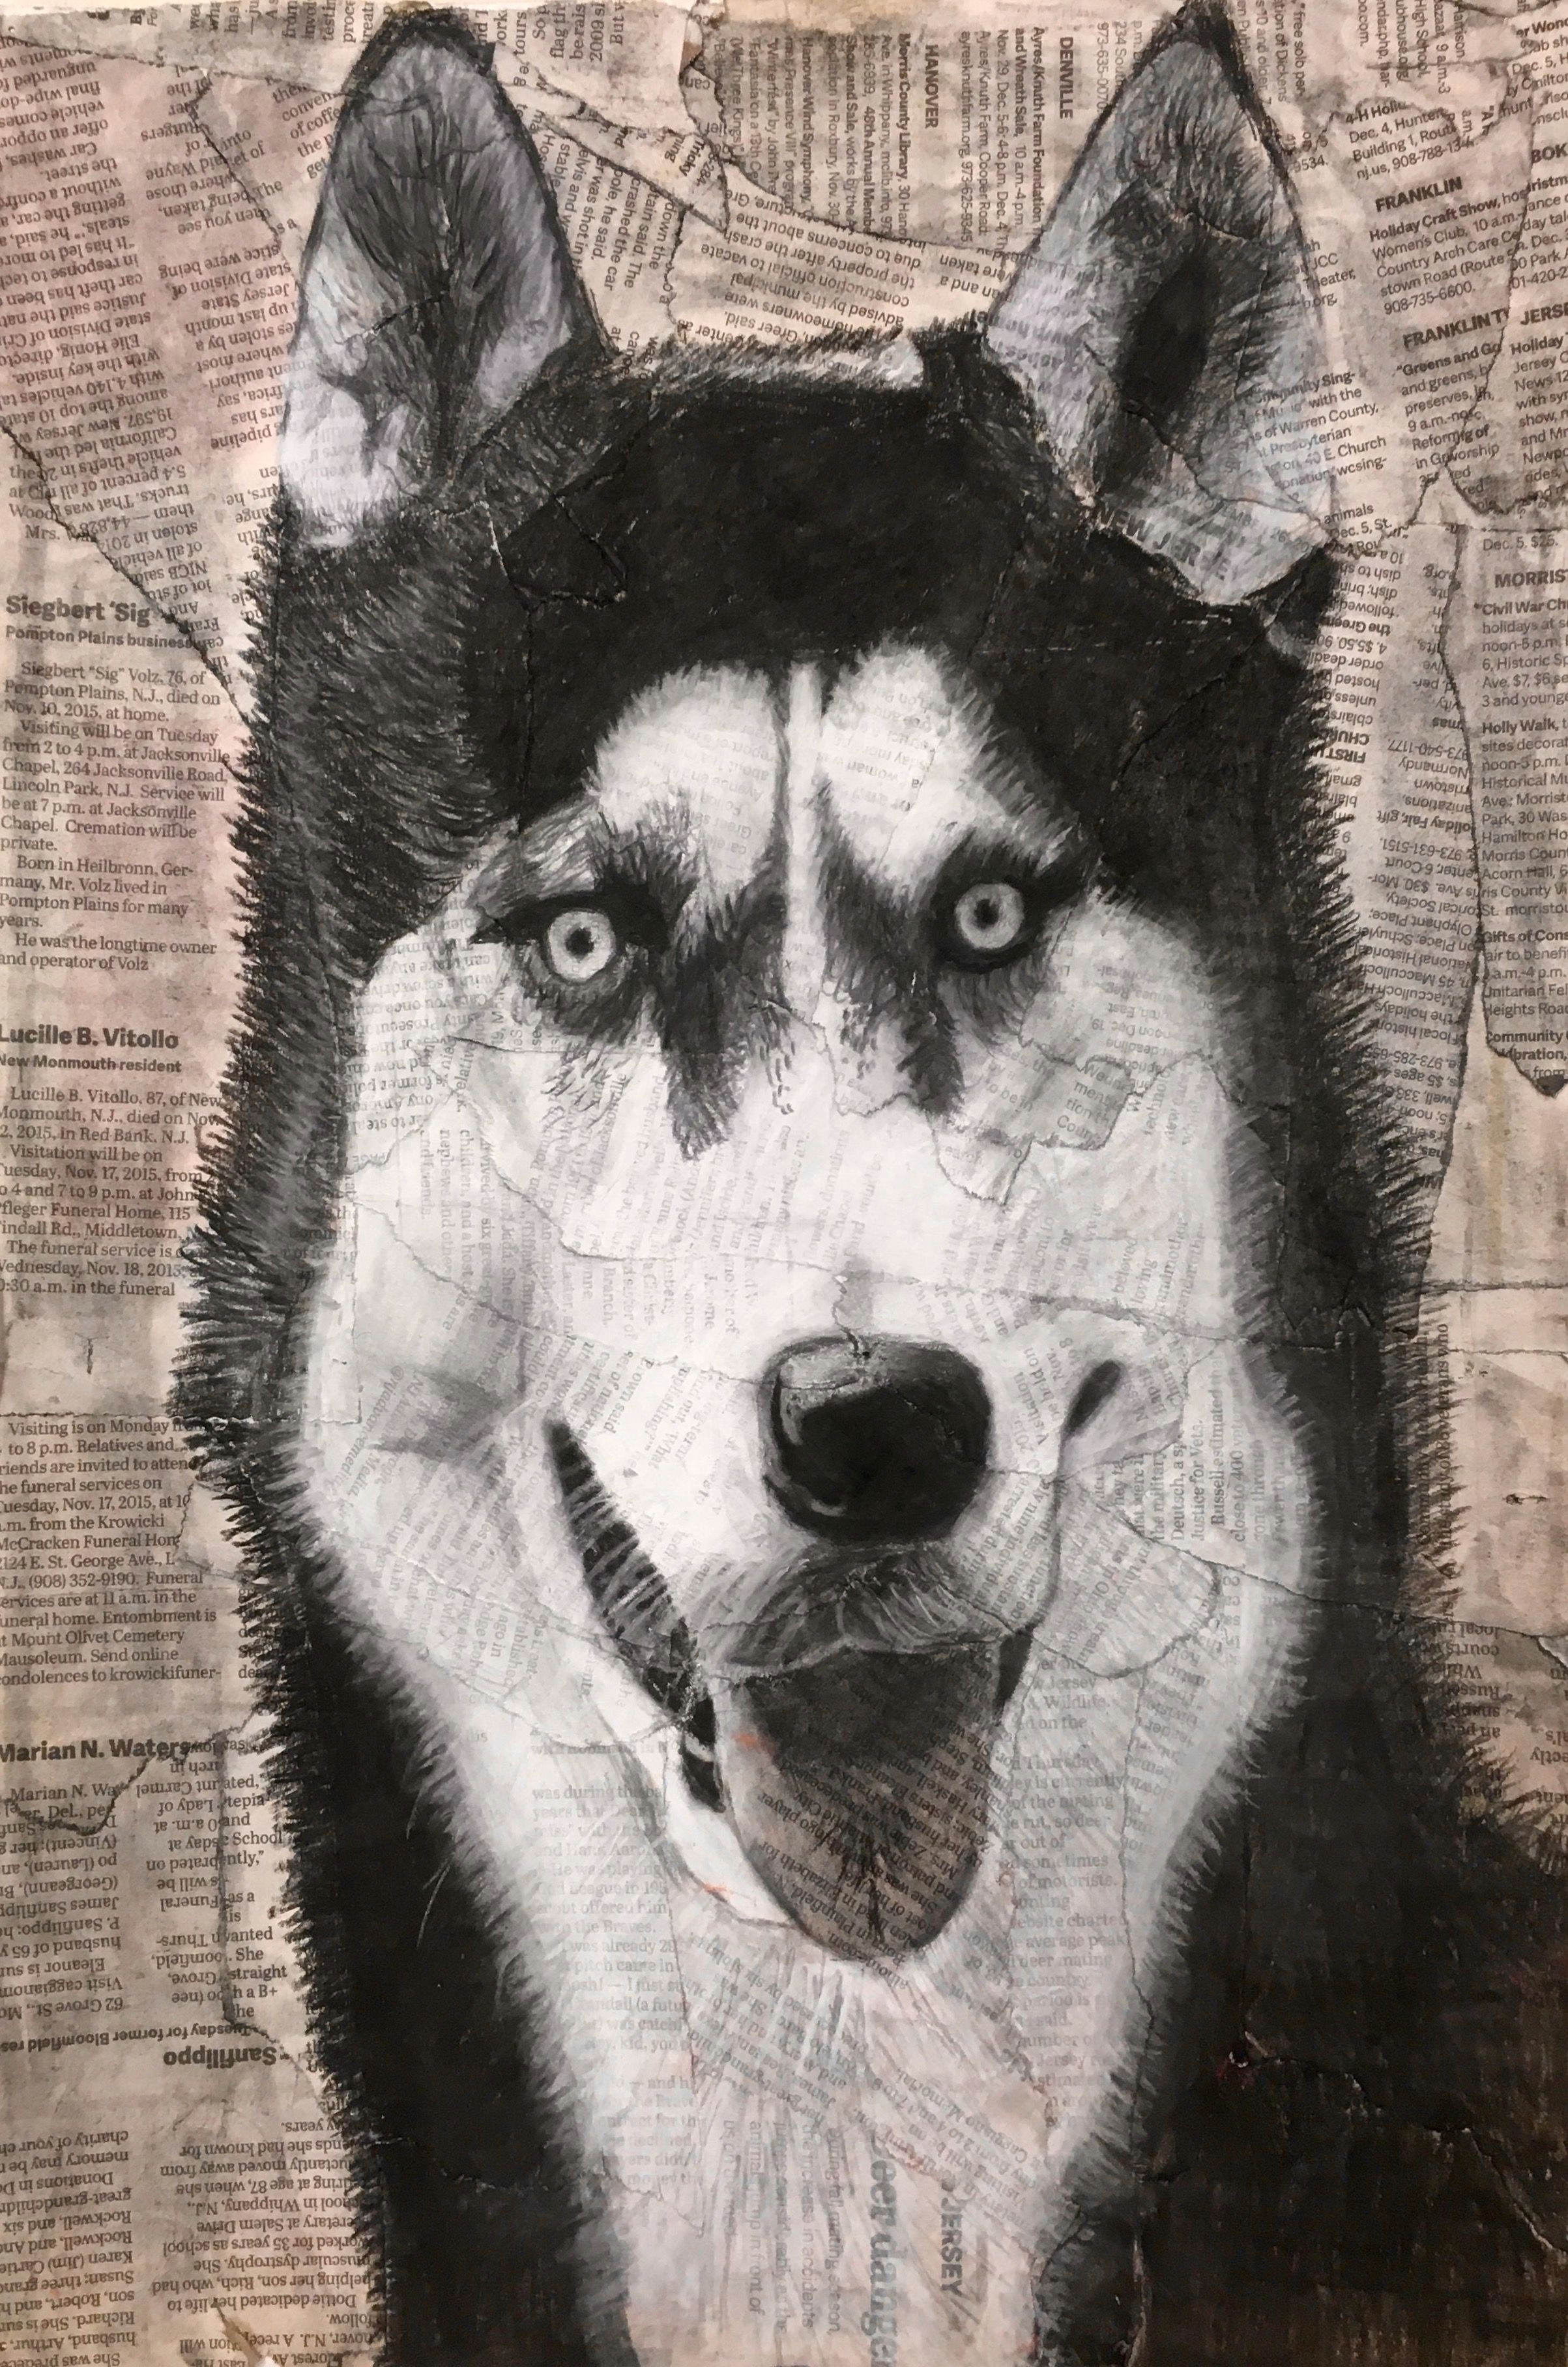 title siberian husky drawing medium charcoal newspaper collage i used different types of charcoal vine compressed pencil and white to create the